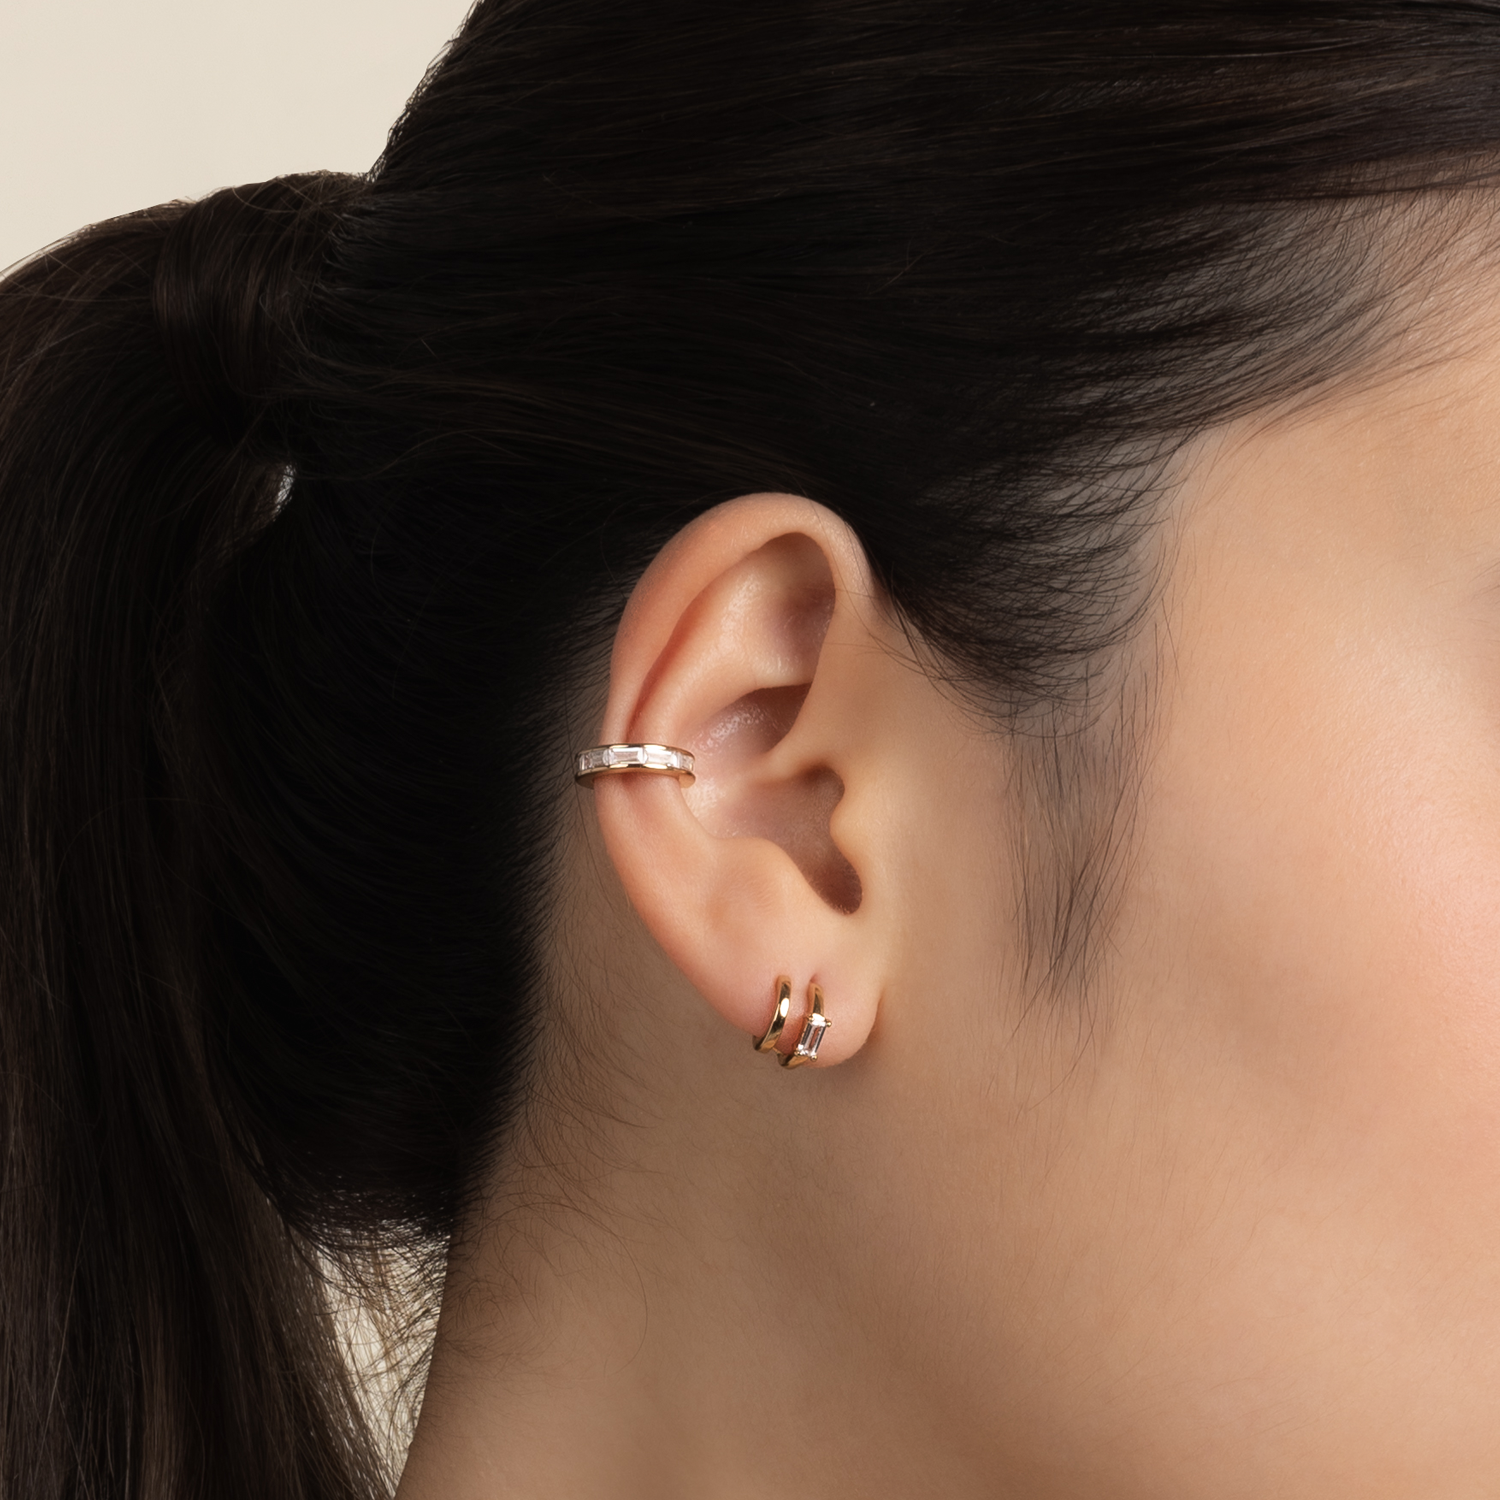 Model wears minimalist and classic ear cuff in gold with cubic zirconia